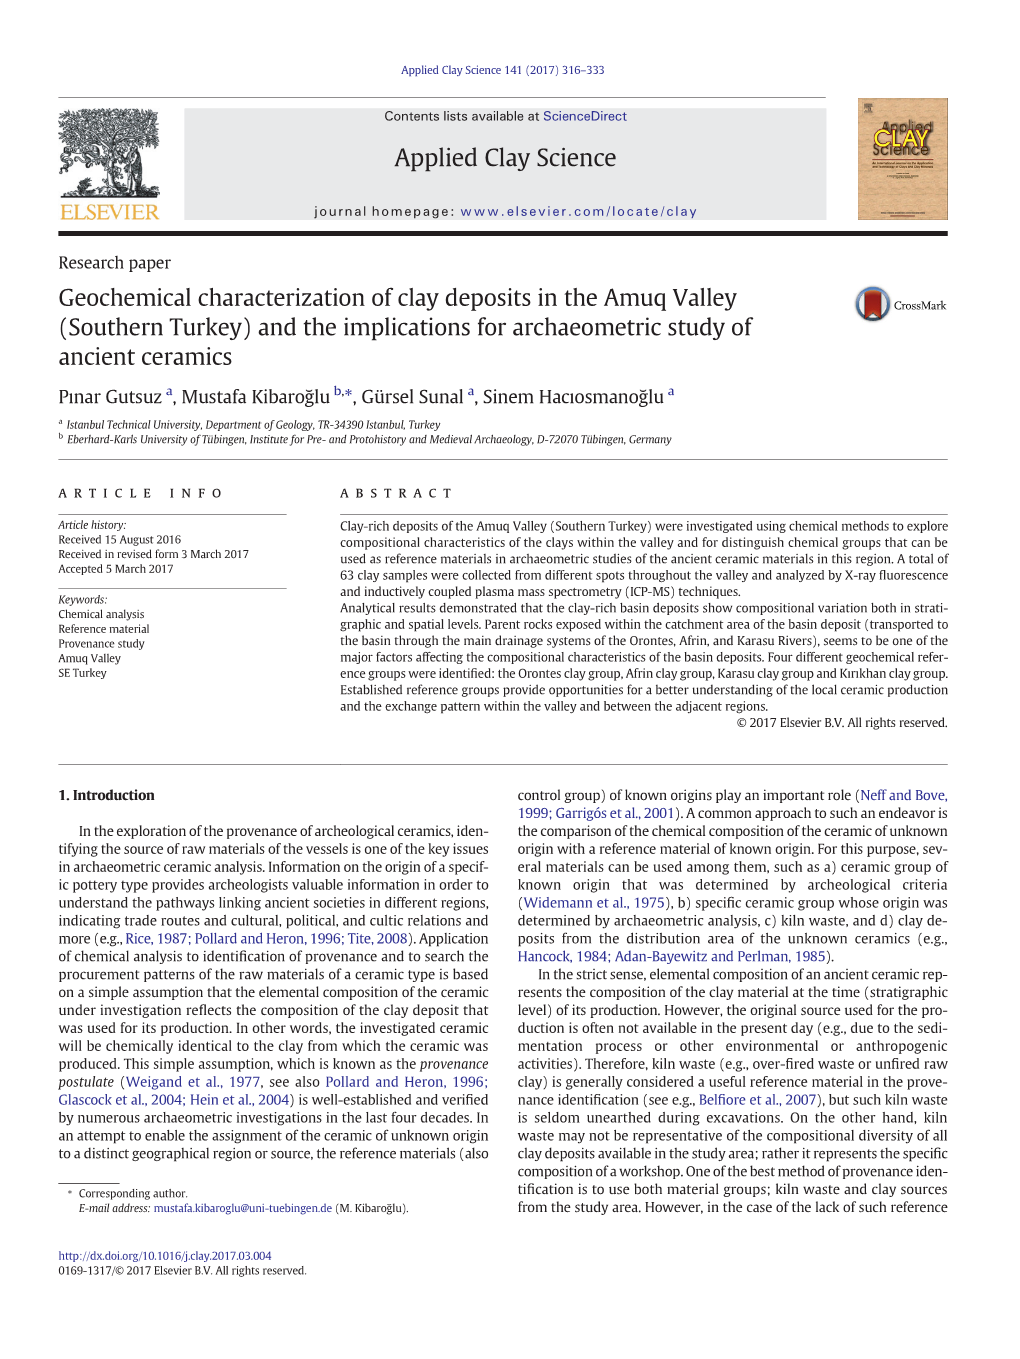 Geochemical Characterization of Clay Deposits in the Amuq Valley (Southern Turkey) and the Implications for Archaeometric Study of Ancient Ceramics